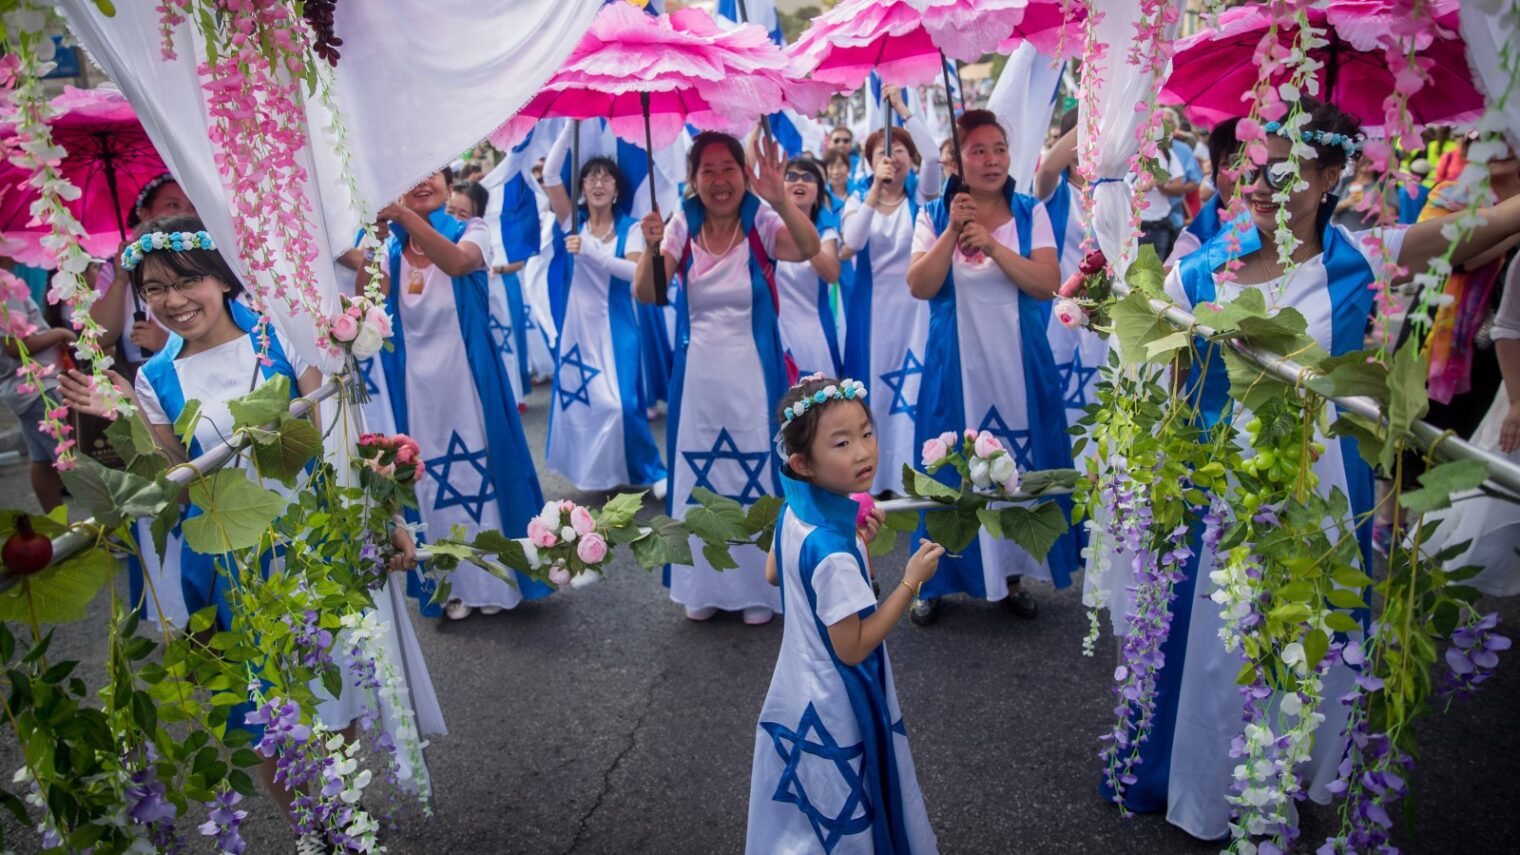 Thousands of Christians and Israelis marched in Jerusalem to mark Sukkot (Feast of Tabernacles), Oct. 10, 2017. Photo by Yonatan Sindel/FLASH90